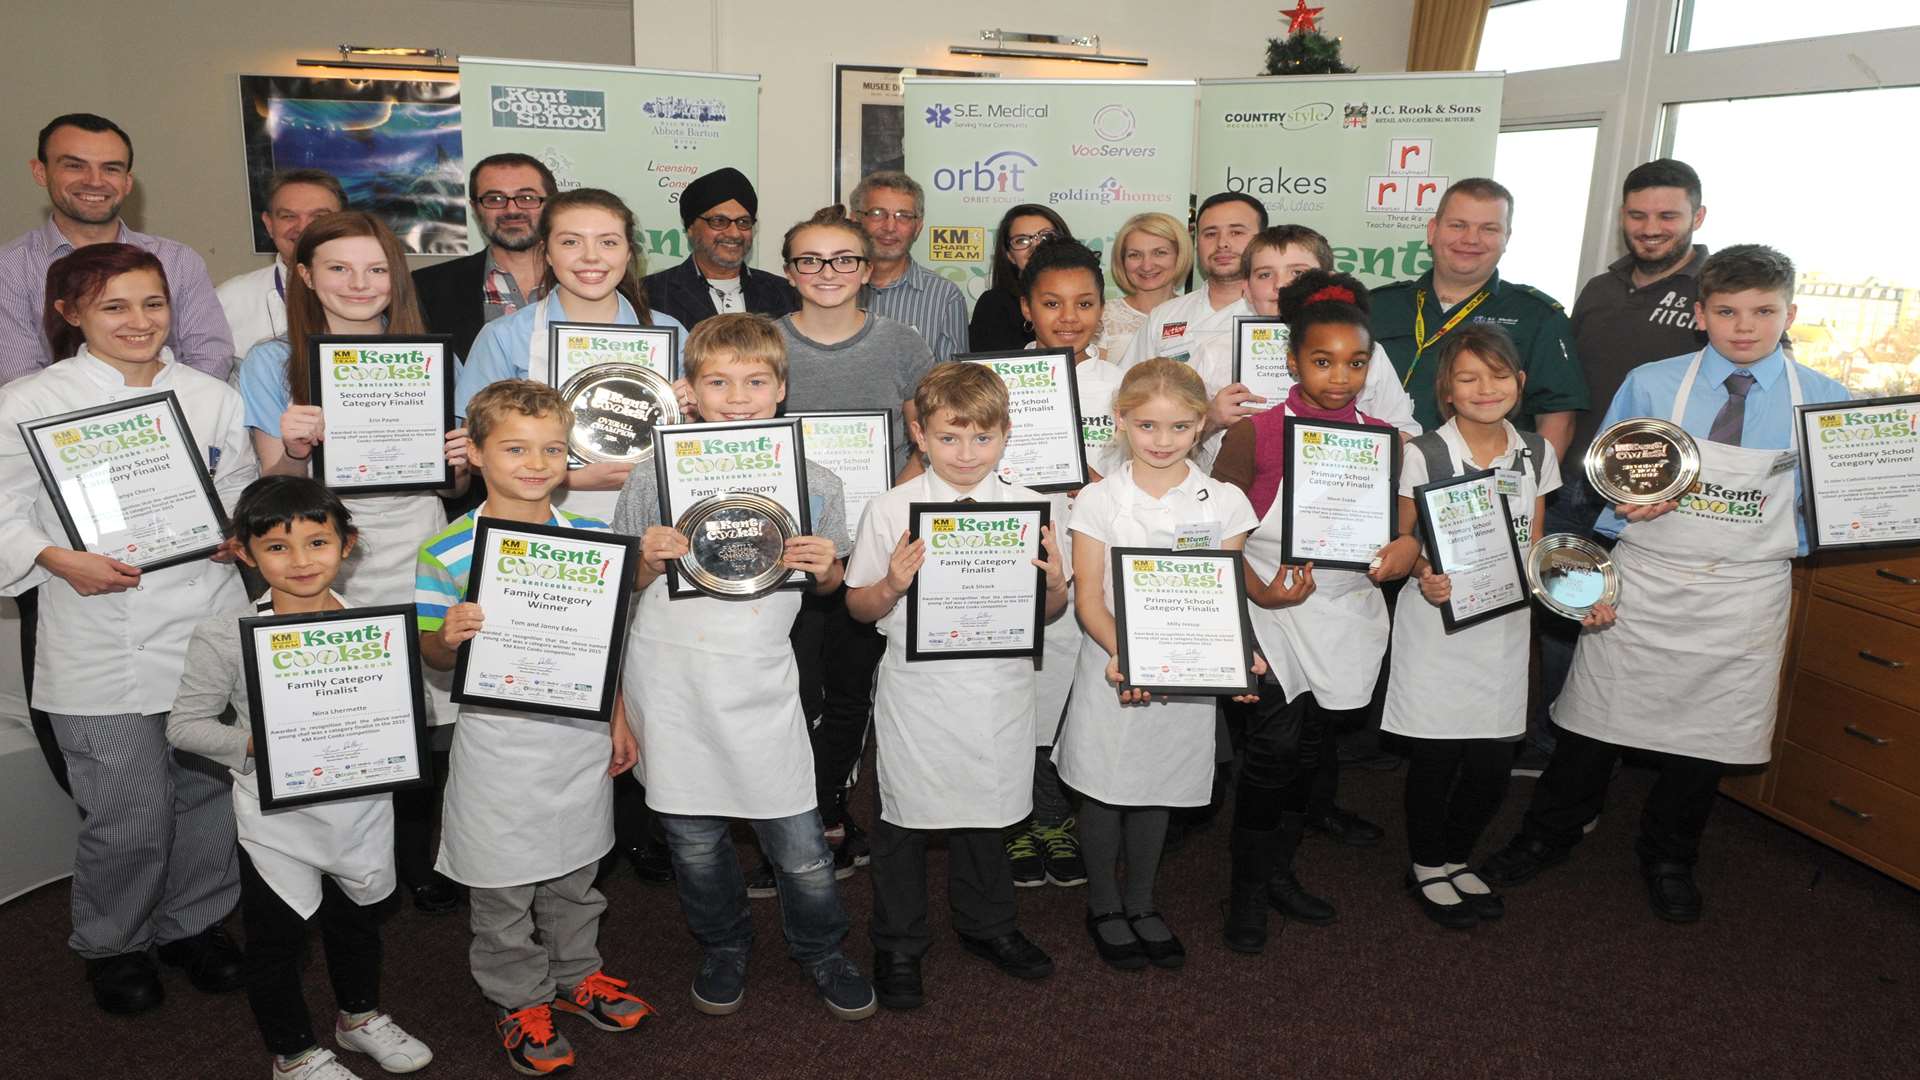 Finalists, winners and supporters of the 2015 KM Kent Cooks contest.